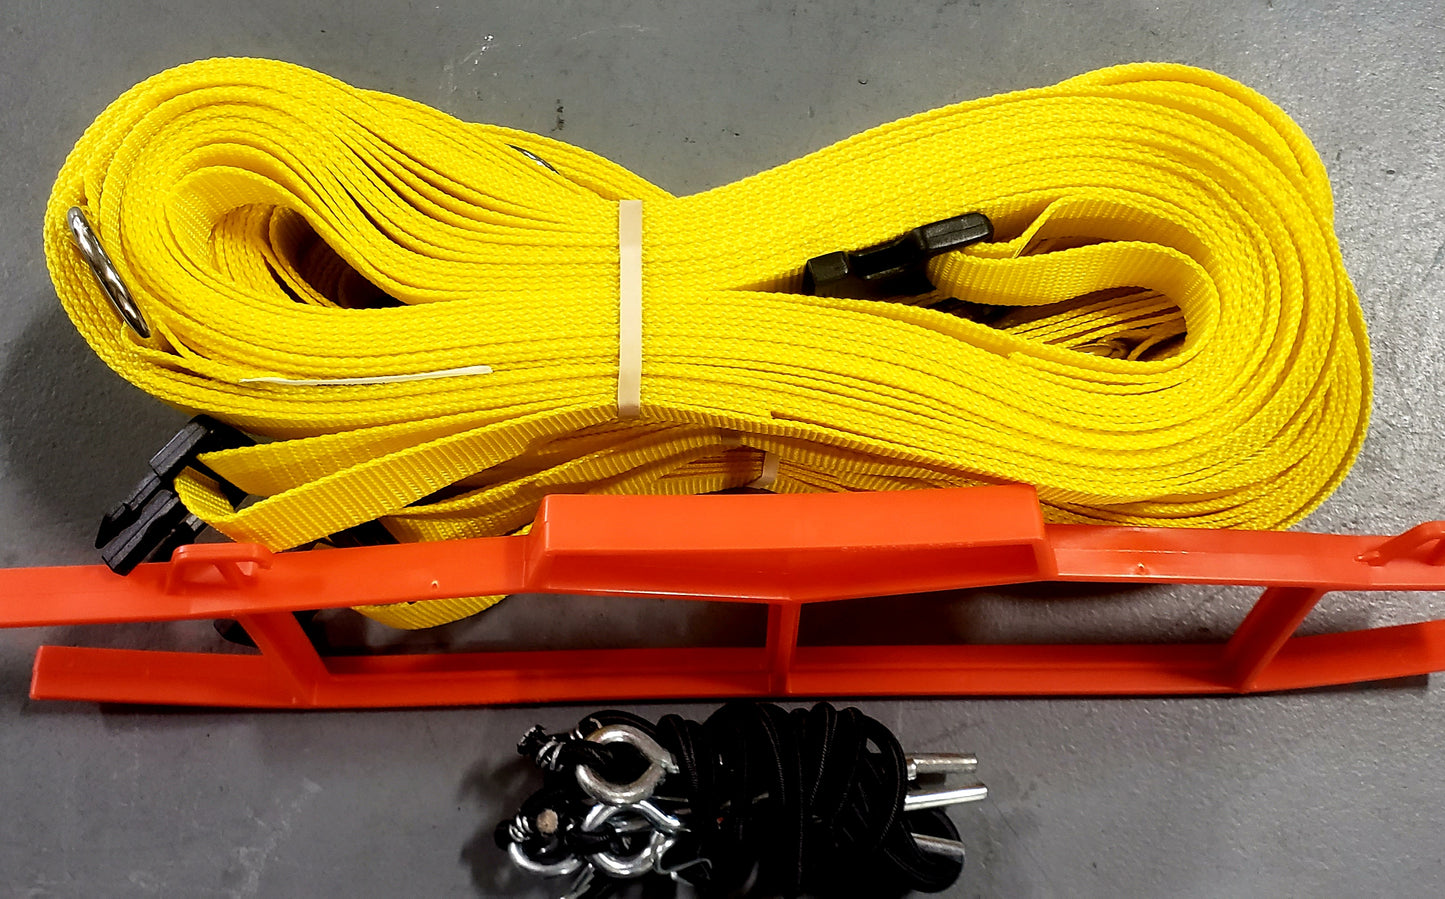 CLEARANCE ITEM #49 M817AG-Yellow, 1" heavyweight webbing boundary line, Adjustable, 26.3 x 52.6-ft (8-Meter), Grass Pegs